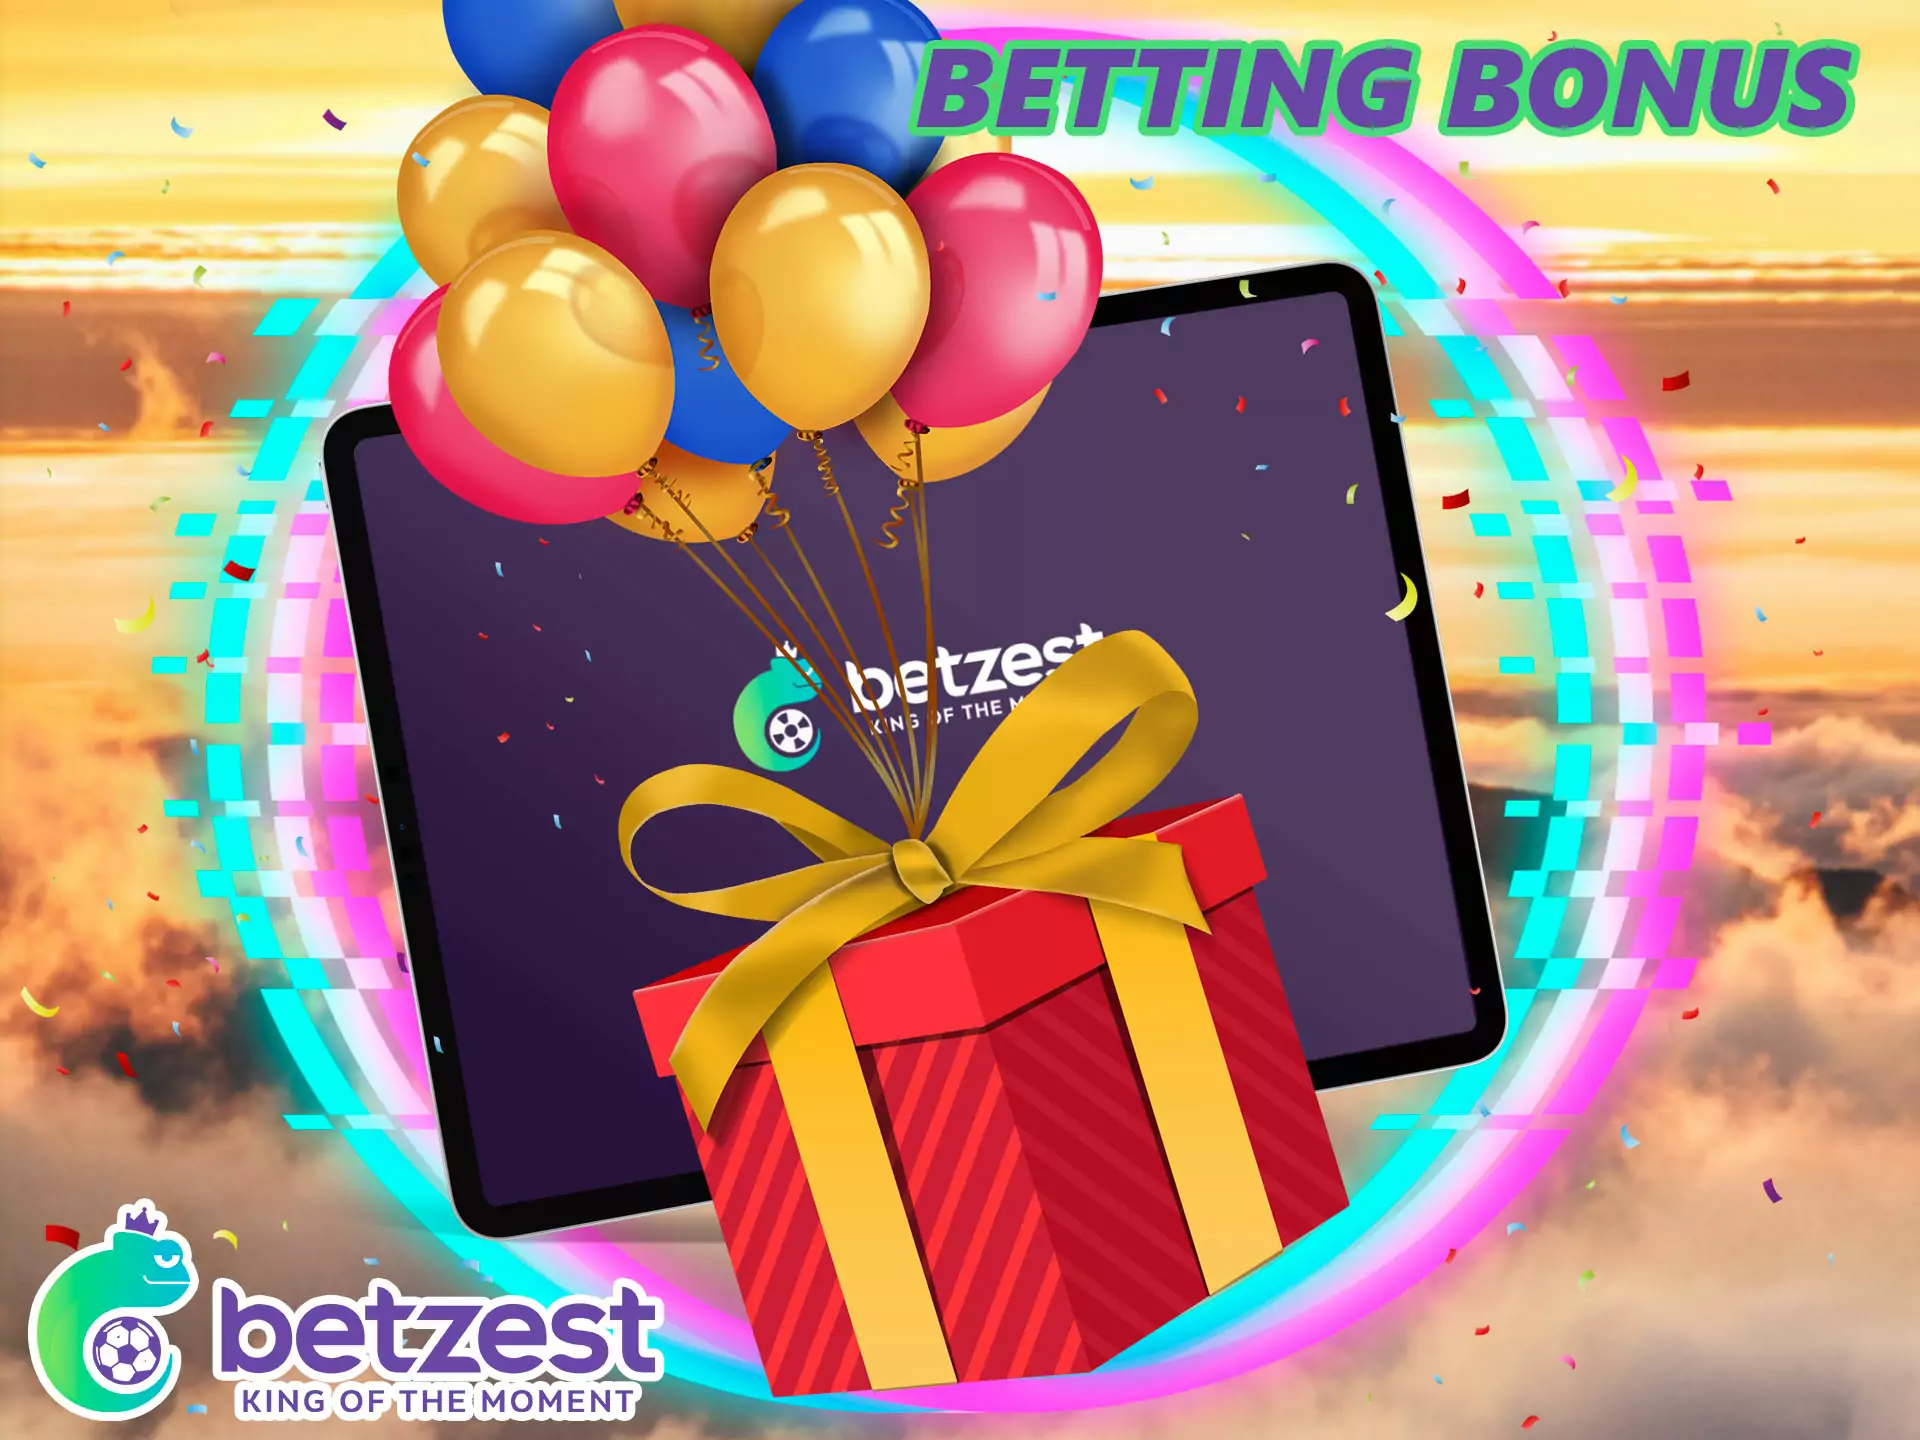 This compliment entitles you to receive 100% of the deposit, it can be used for any betting mode.